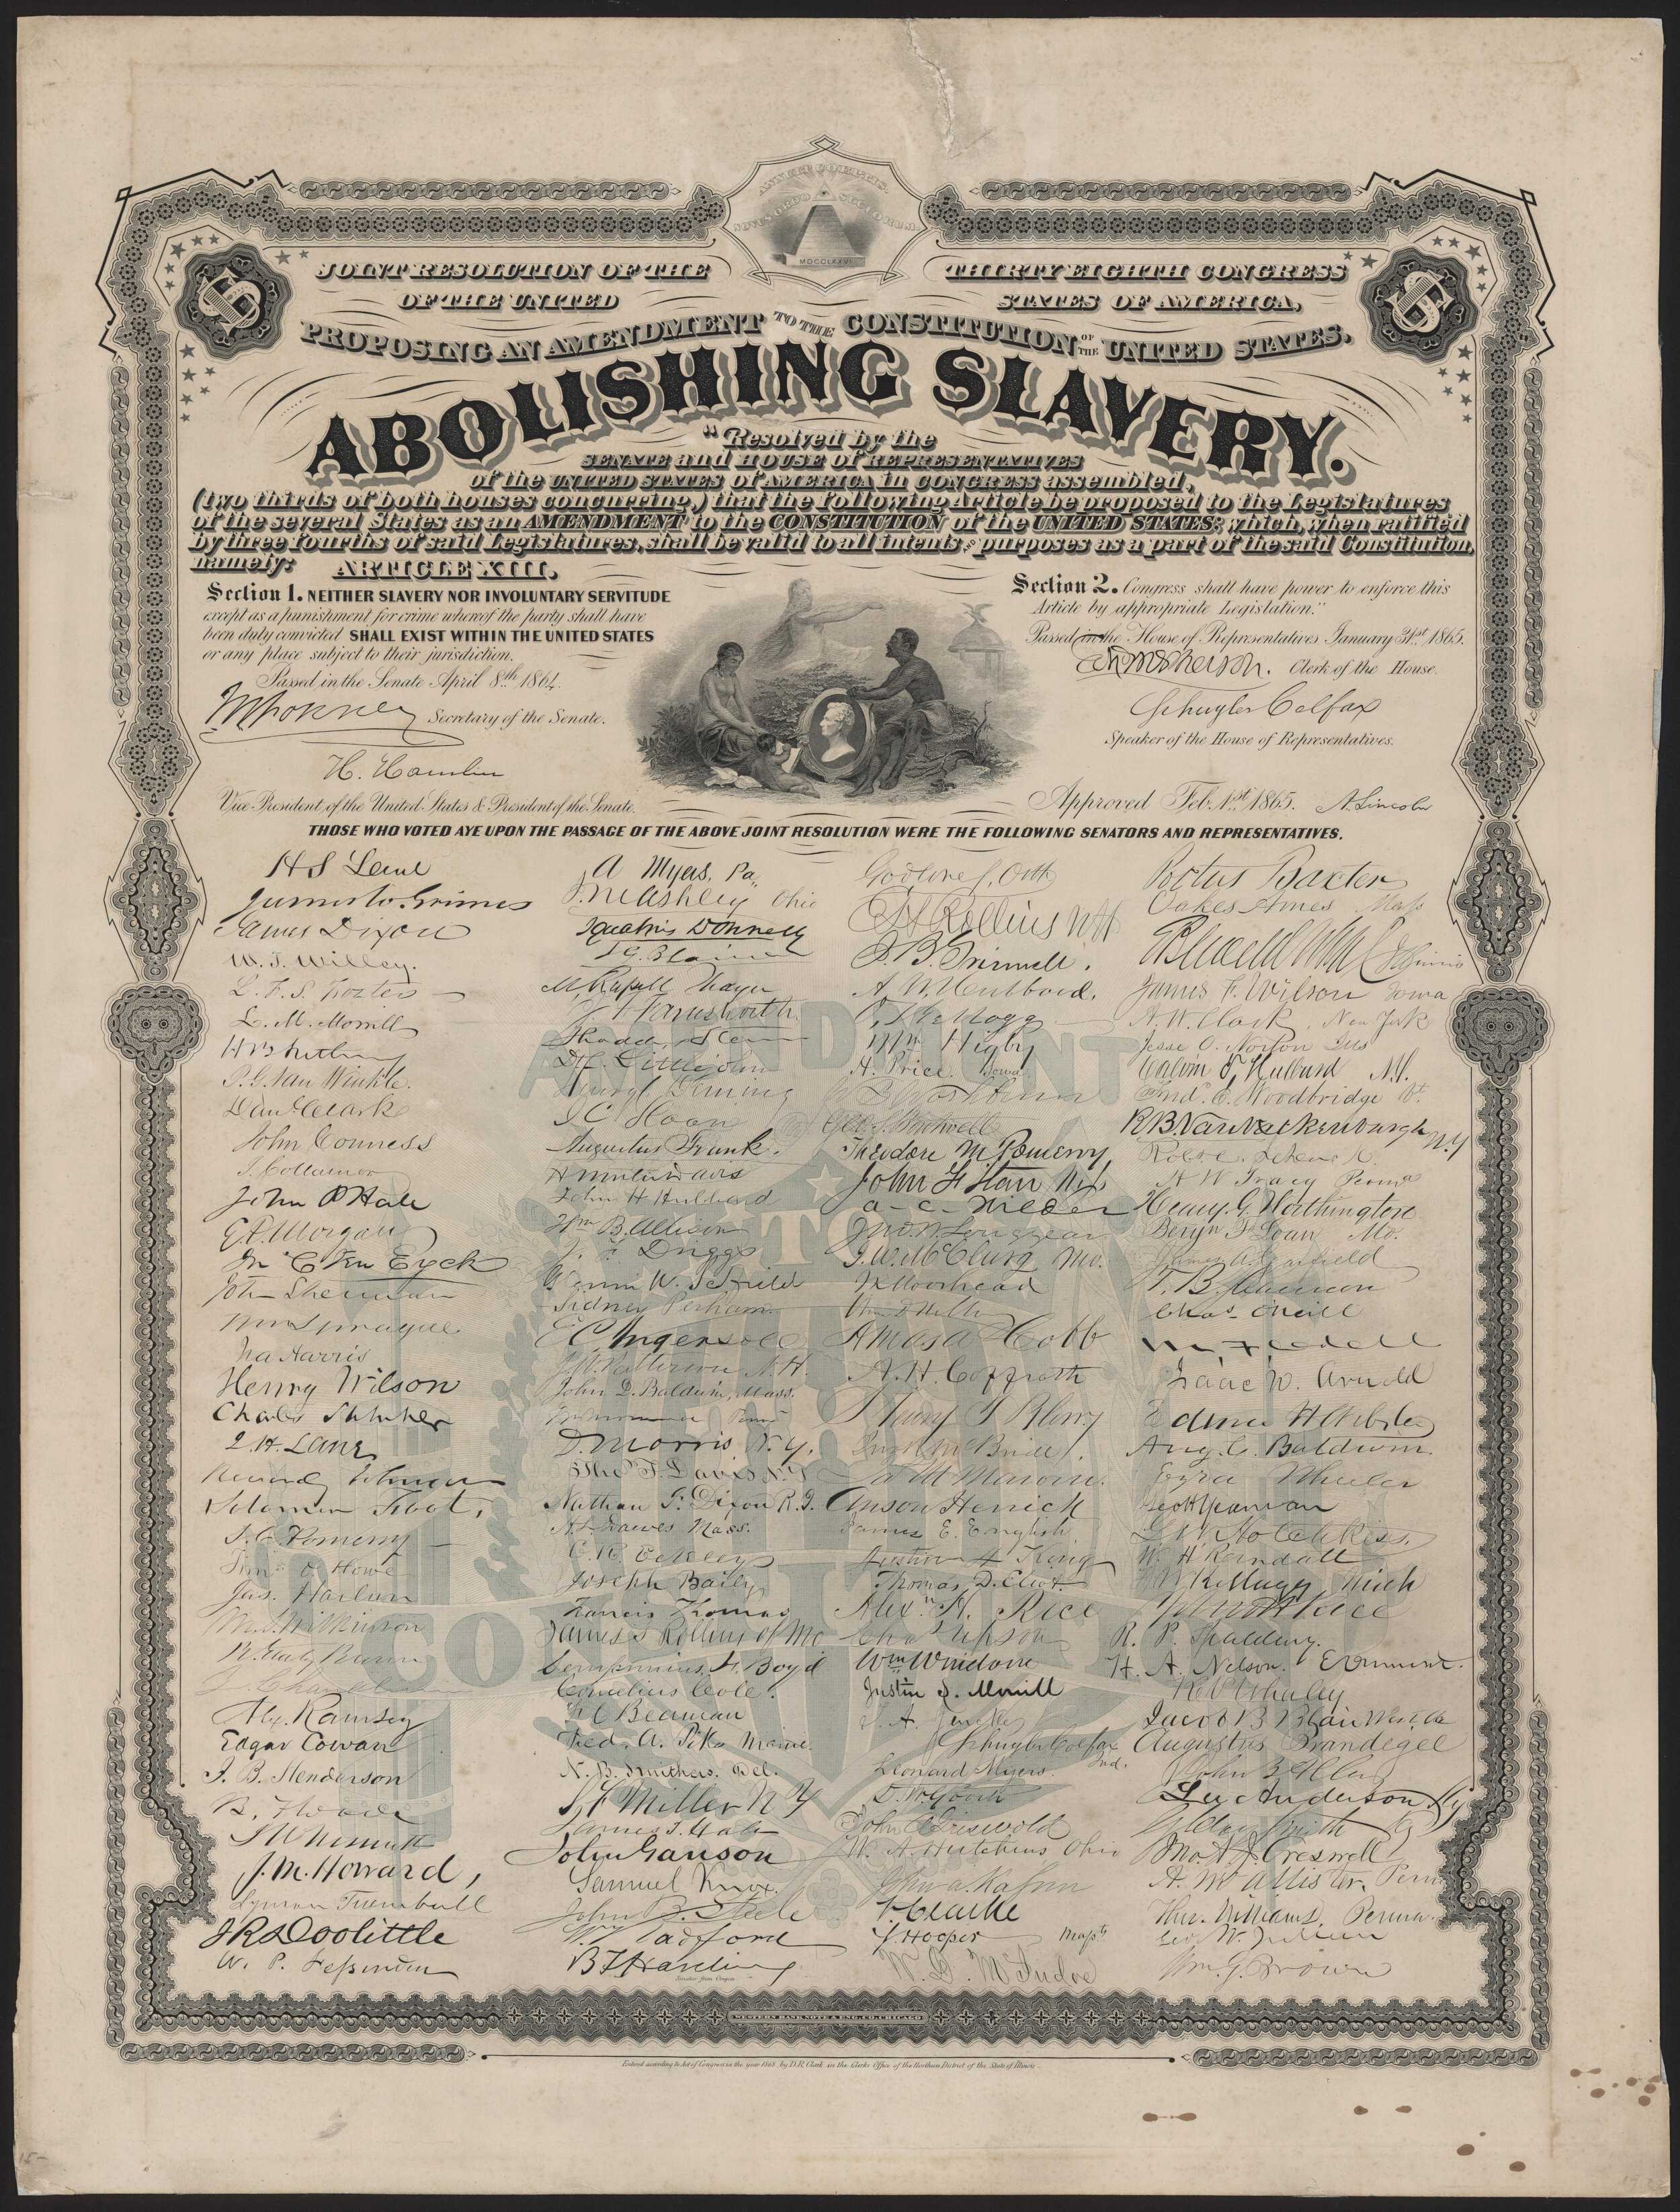 A joint resolution from the thirty eight Congress proposing an amendment to abolish slavery, signed by Congress.